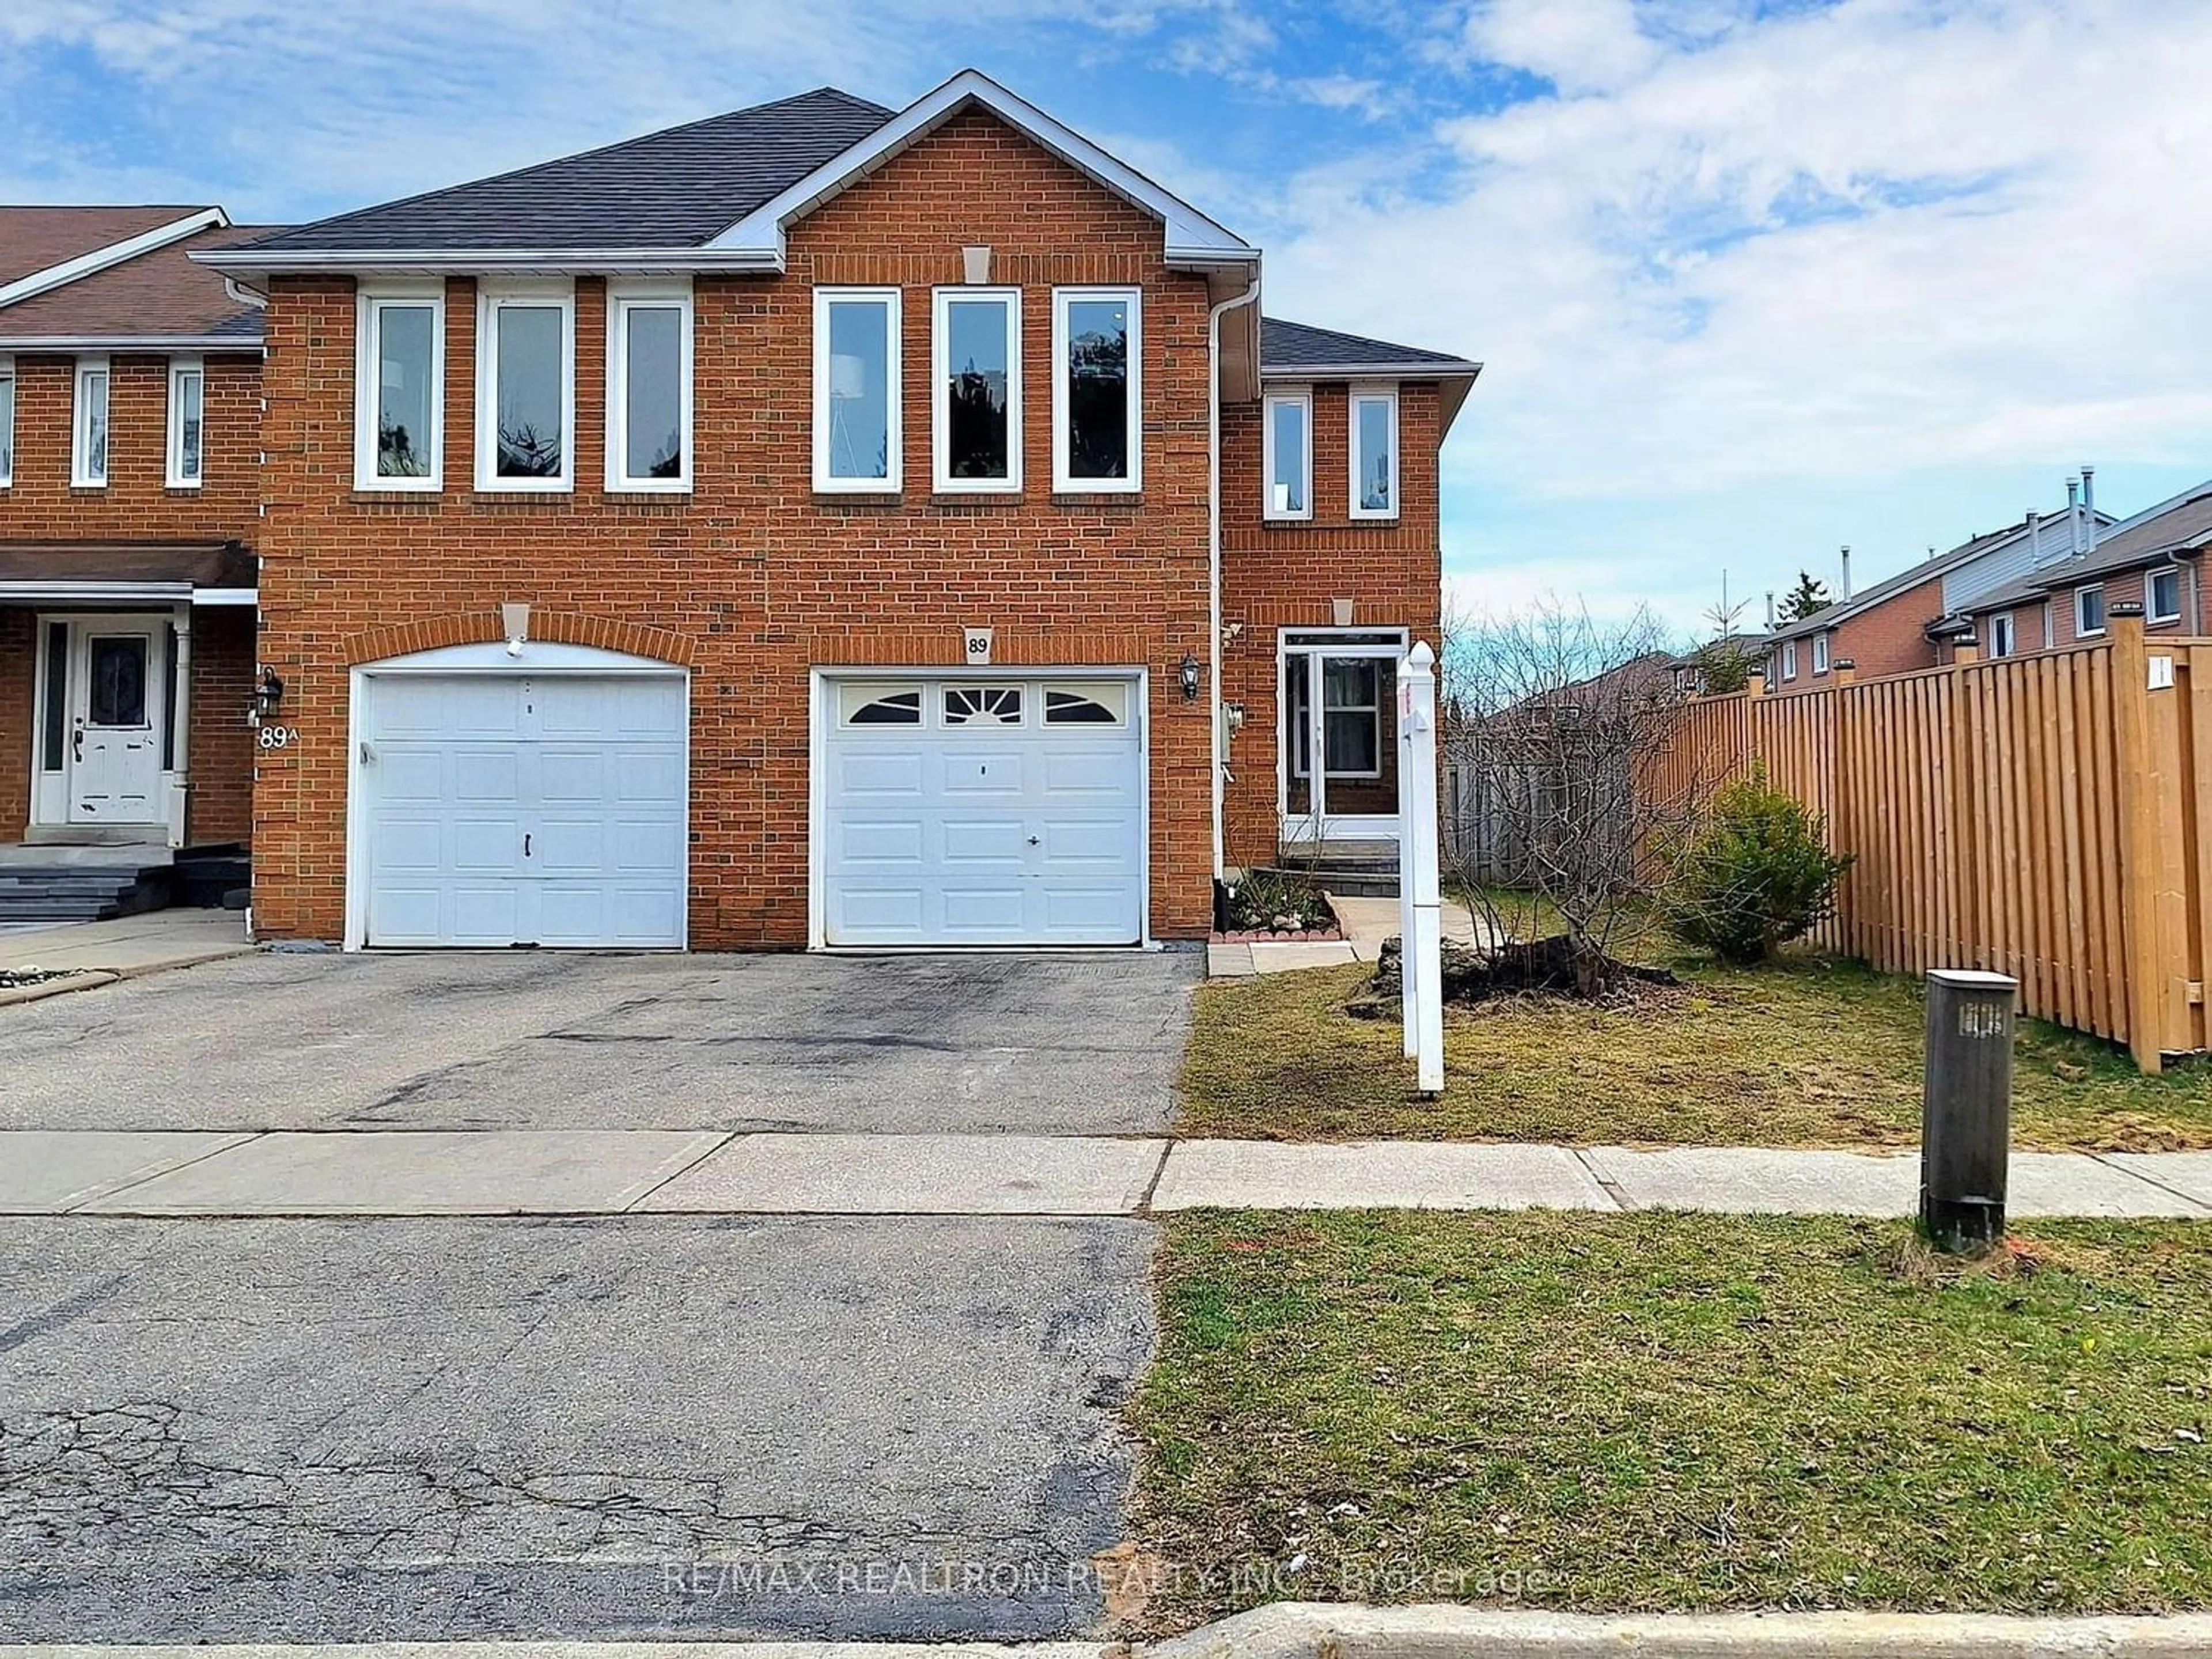 Home with brick exterior material for 89 Rose Branch Dr, Richmond Hill Ontario L4S 1J5